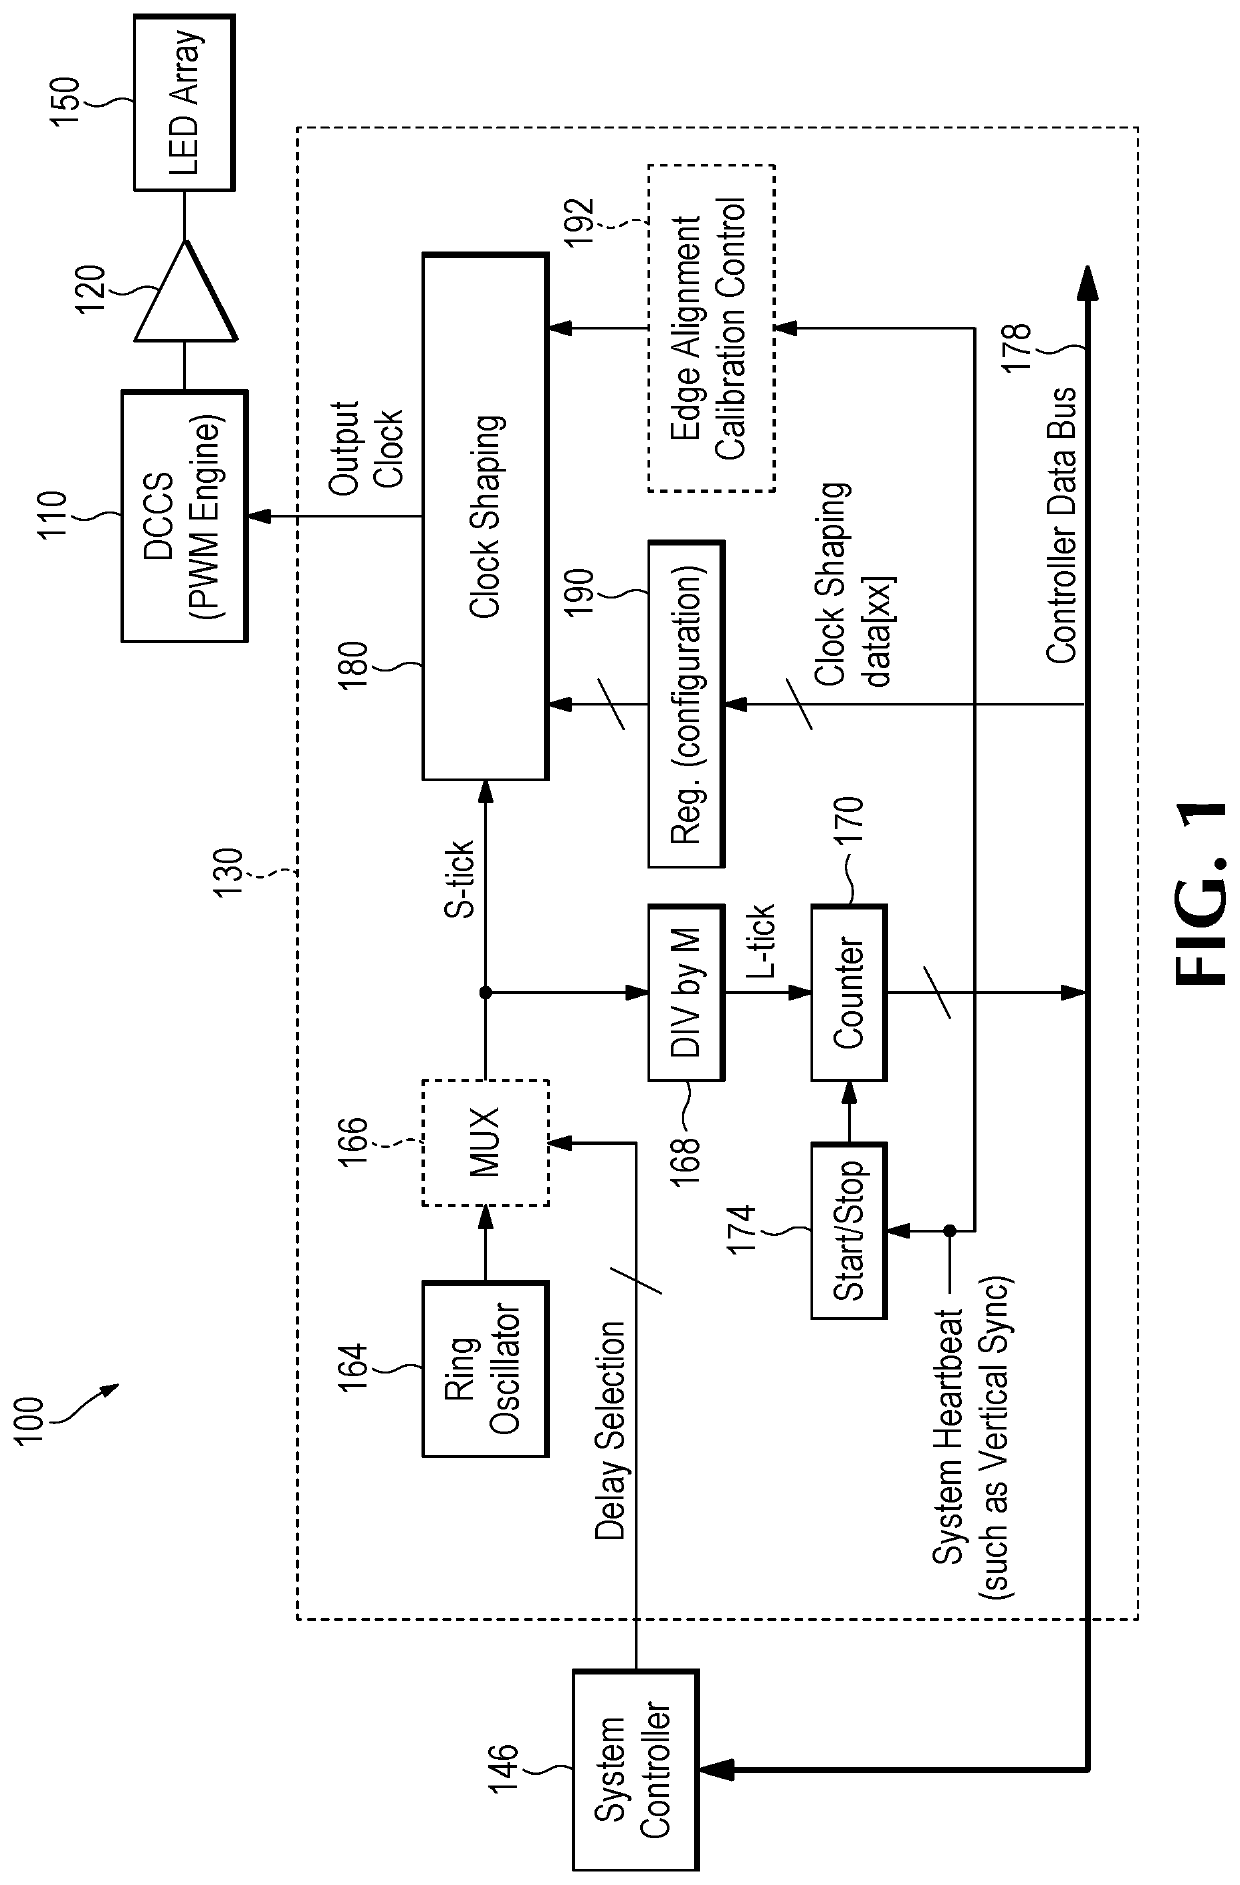 Clock synthesis circuitry and associated techniques for generating clock signals refreshing display screen content